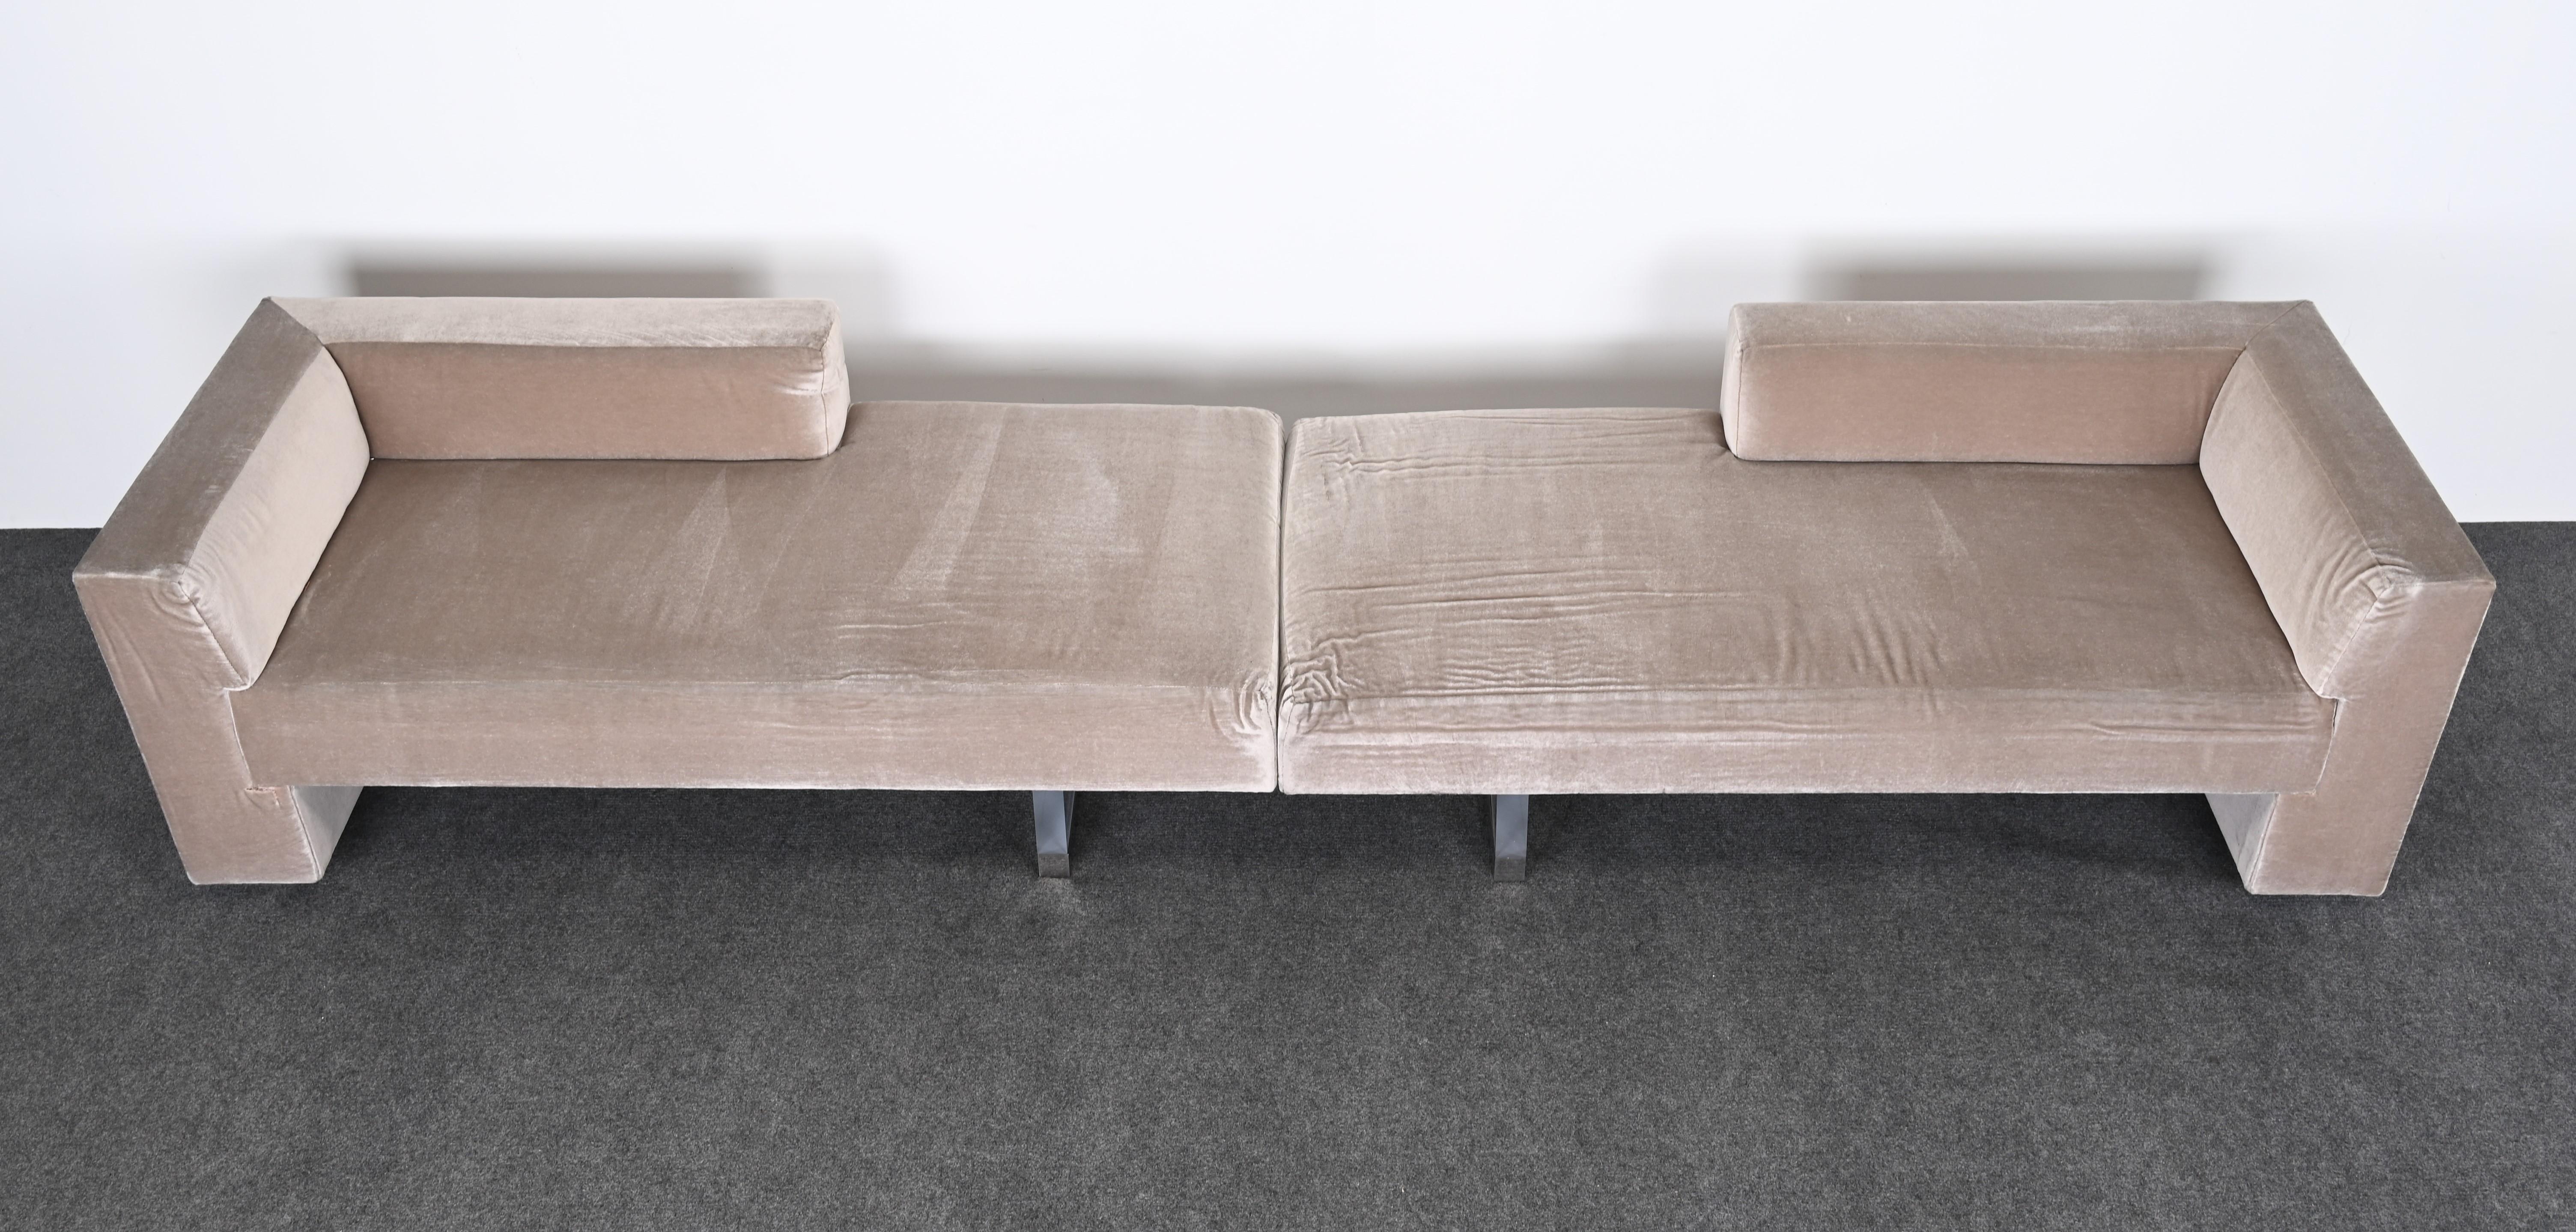 Two Piece Sectional Sofas by Vladimir Kagan for Gucci, 1990s 1